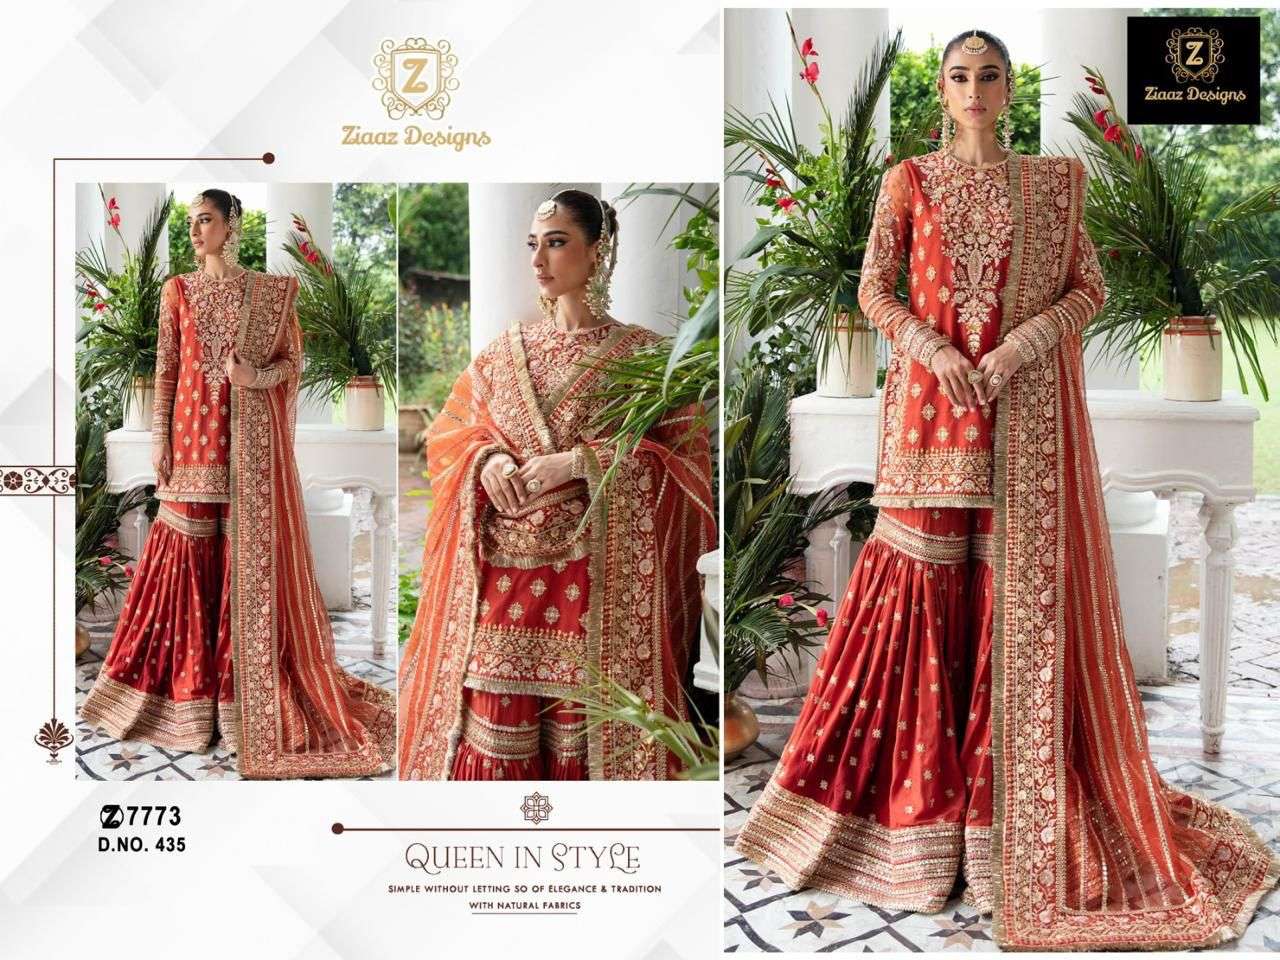 Ziaaz Designs 435 Georgette embroidered very beautiful shade dusty orange suit